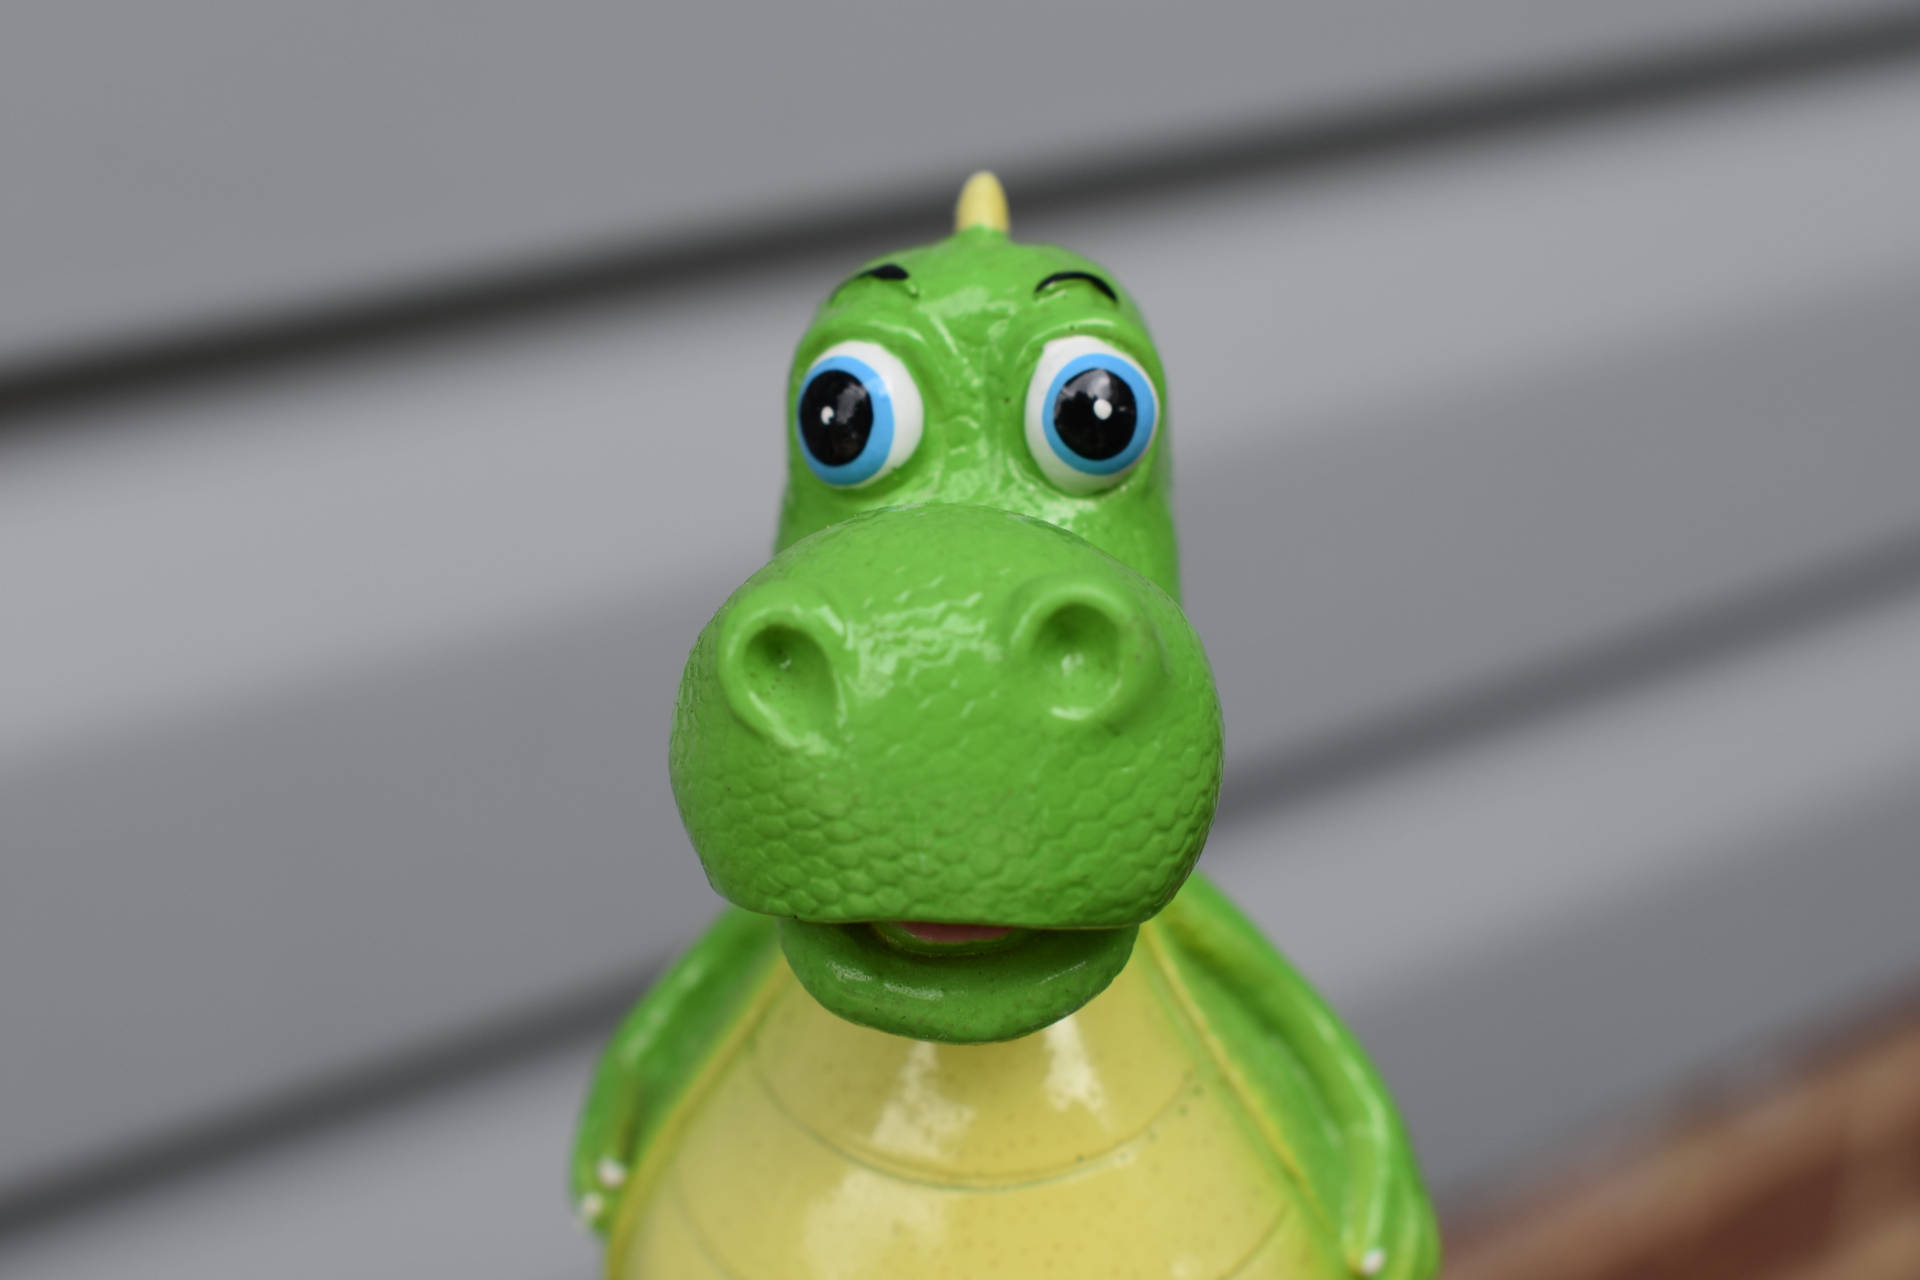 Adorable Toy Dinosaur In Close-up Shot Background